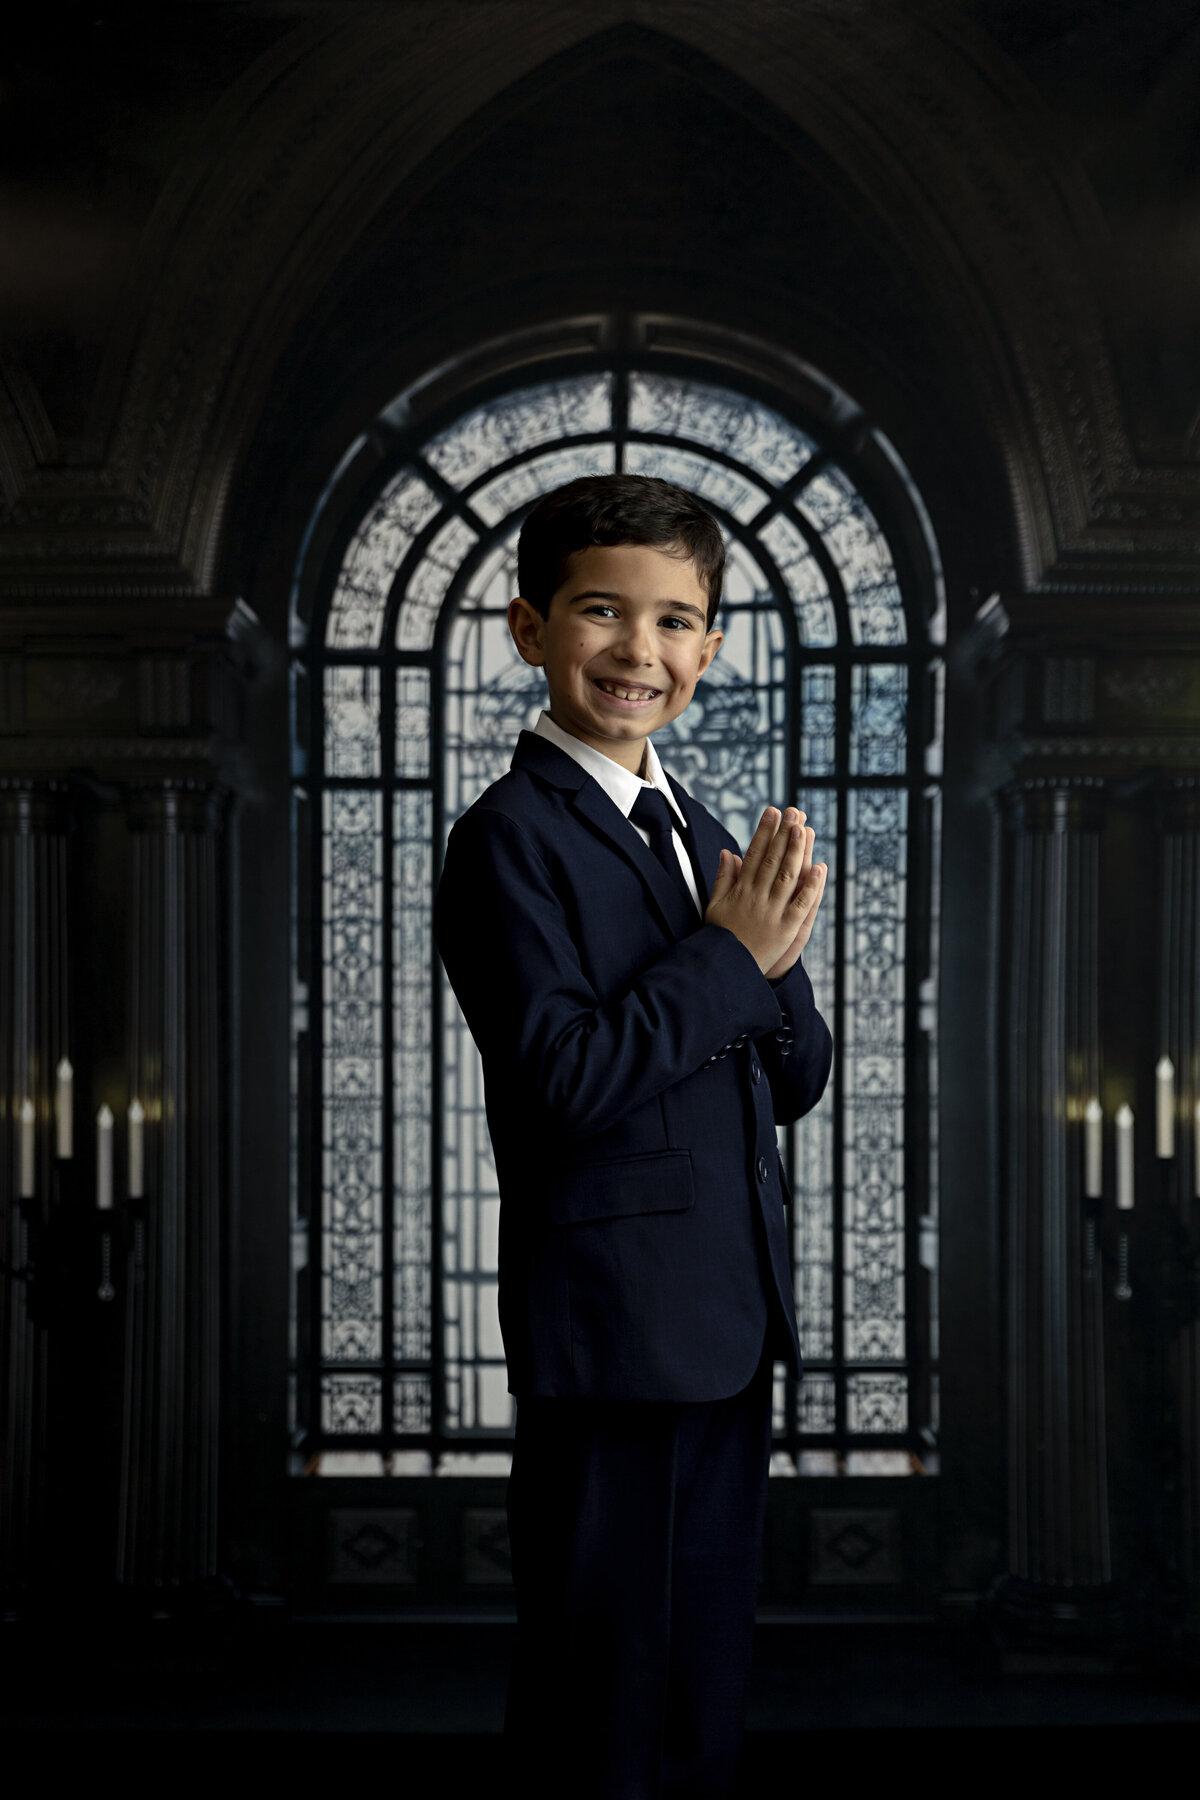 A young boy in a dark suit stands in a church smiling and praying